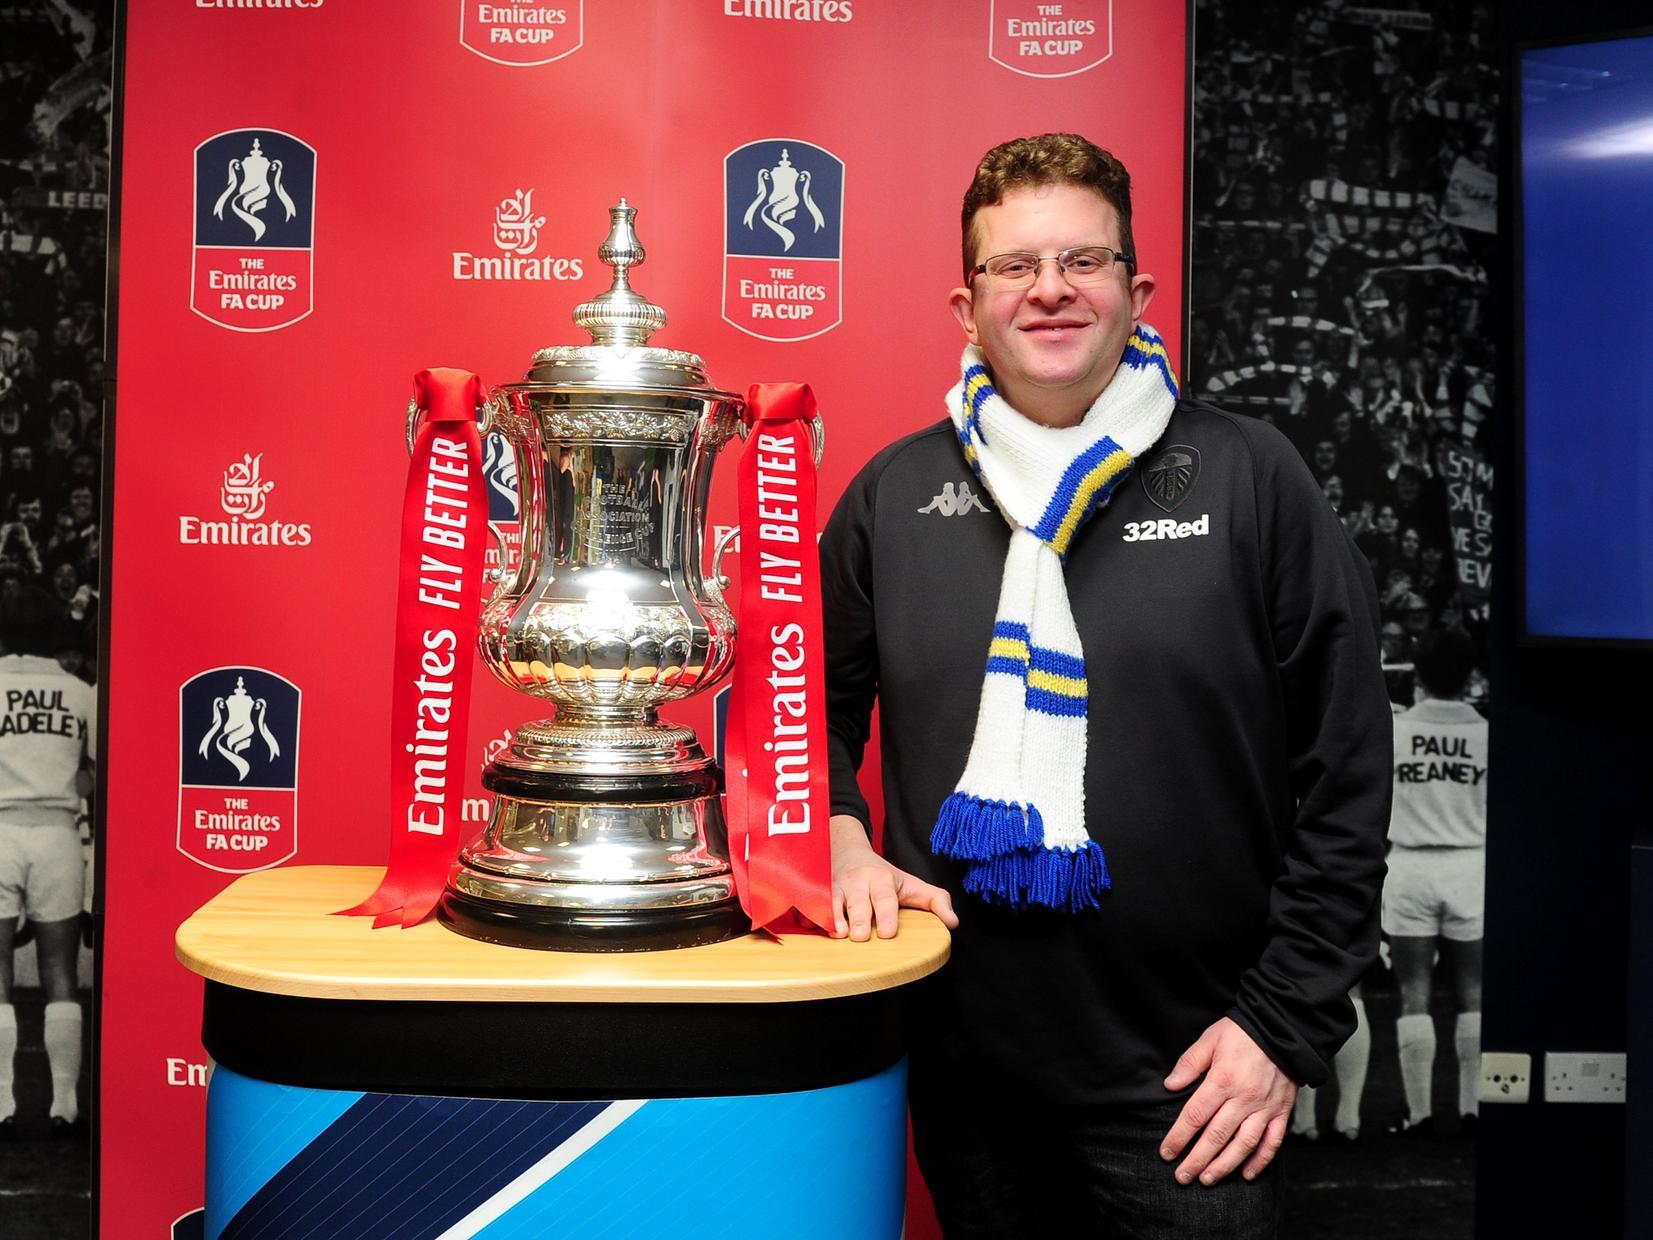 Christopher Metcalfe from Crossgates is pictured with the cup